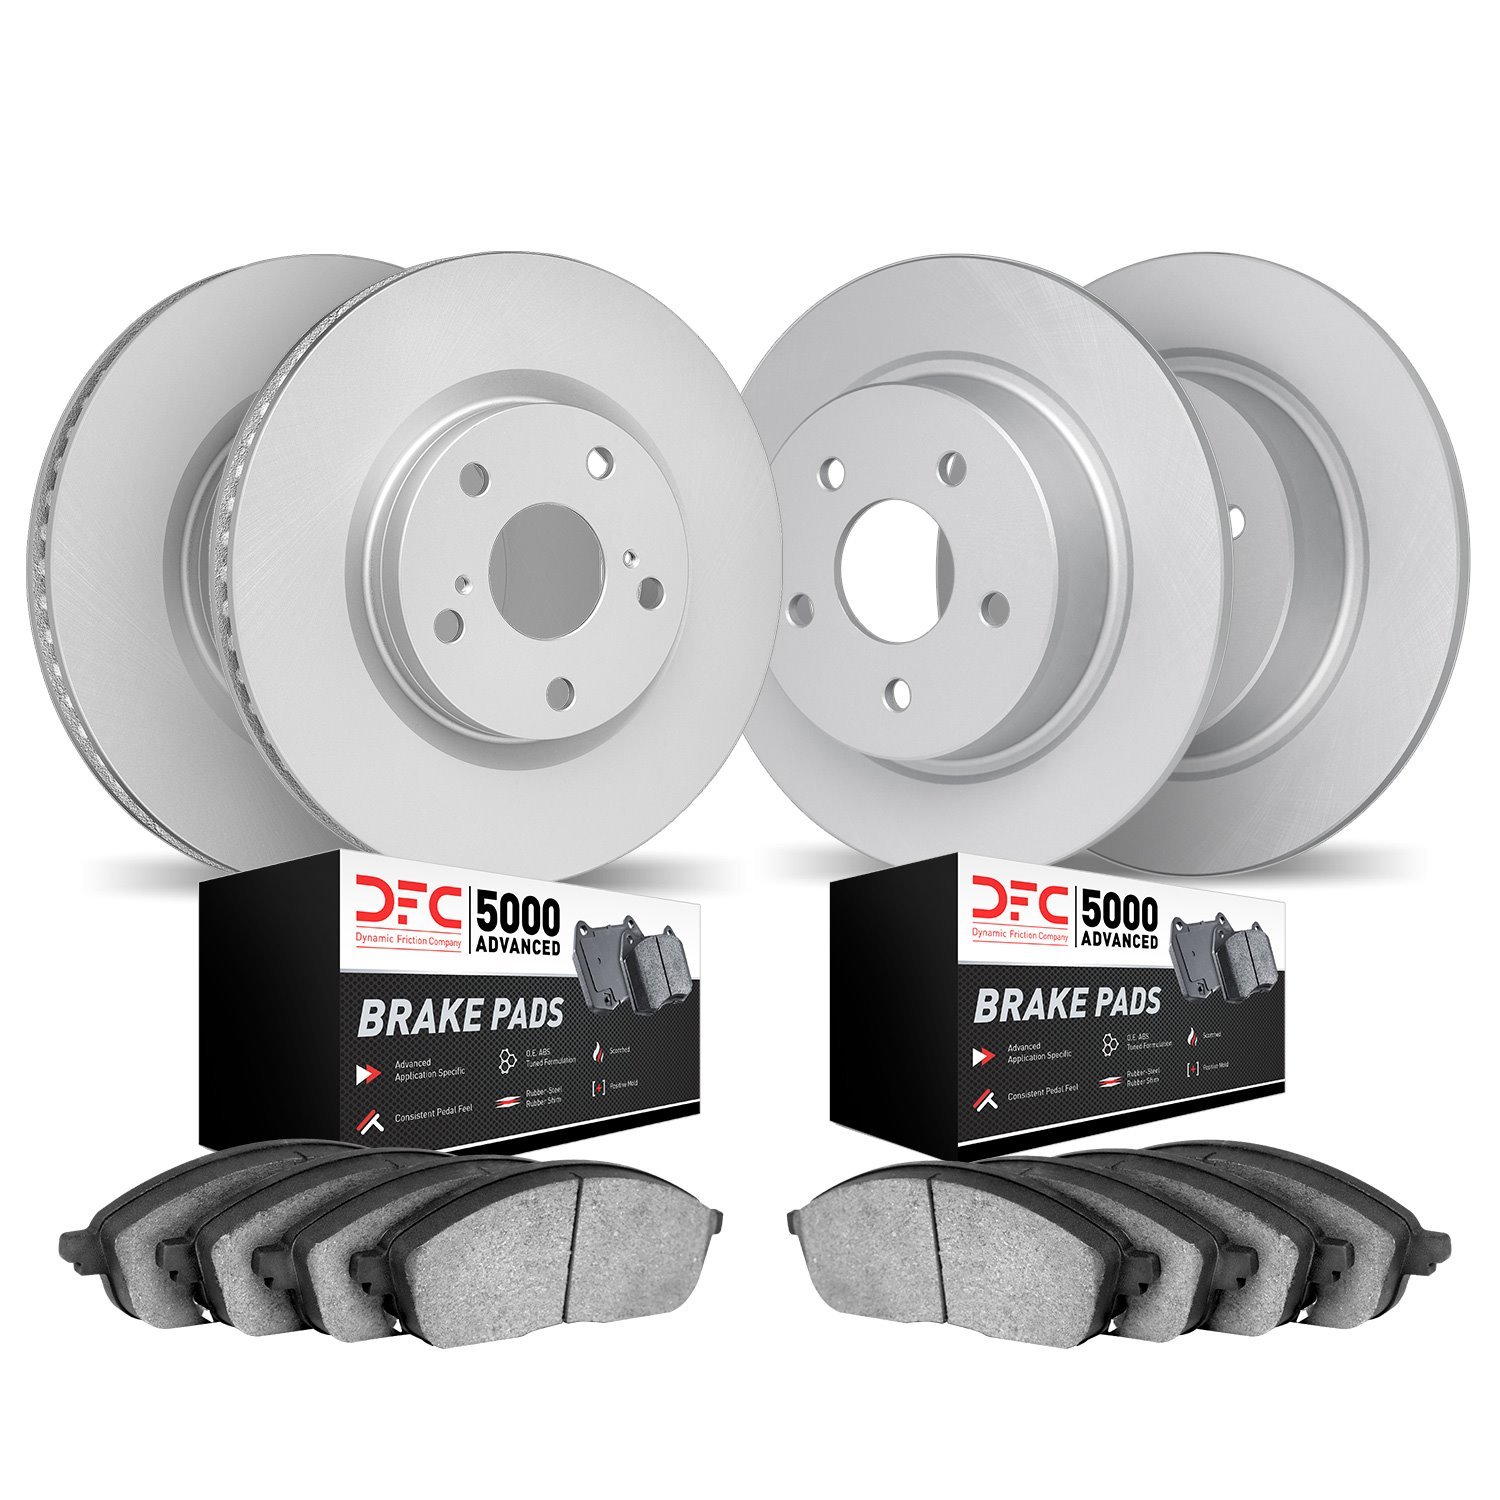 4504-74006 Geospec Brake Rotors w/5000 Advanced Brake Pads Kit, Fits Select Audi/Volkswagen, Position: Front and Rear